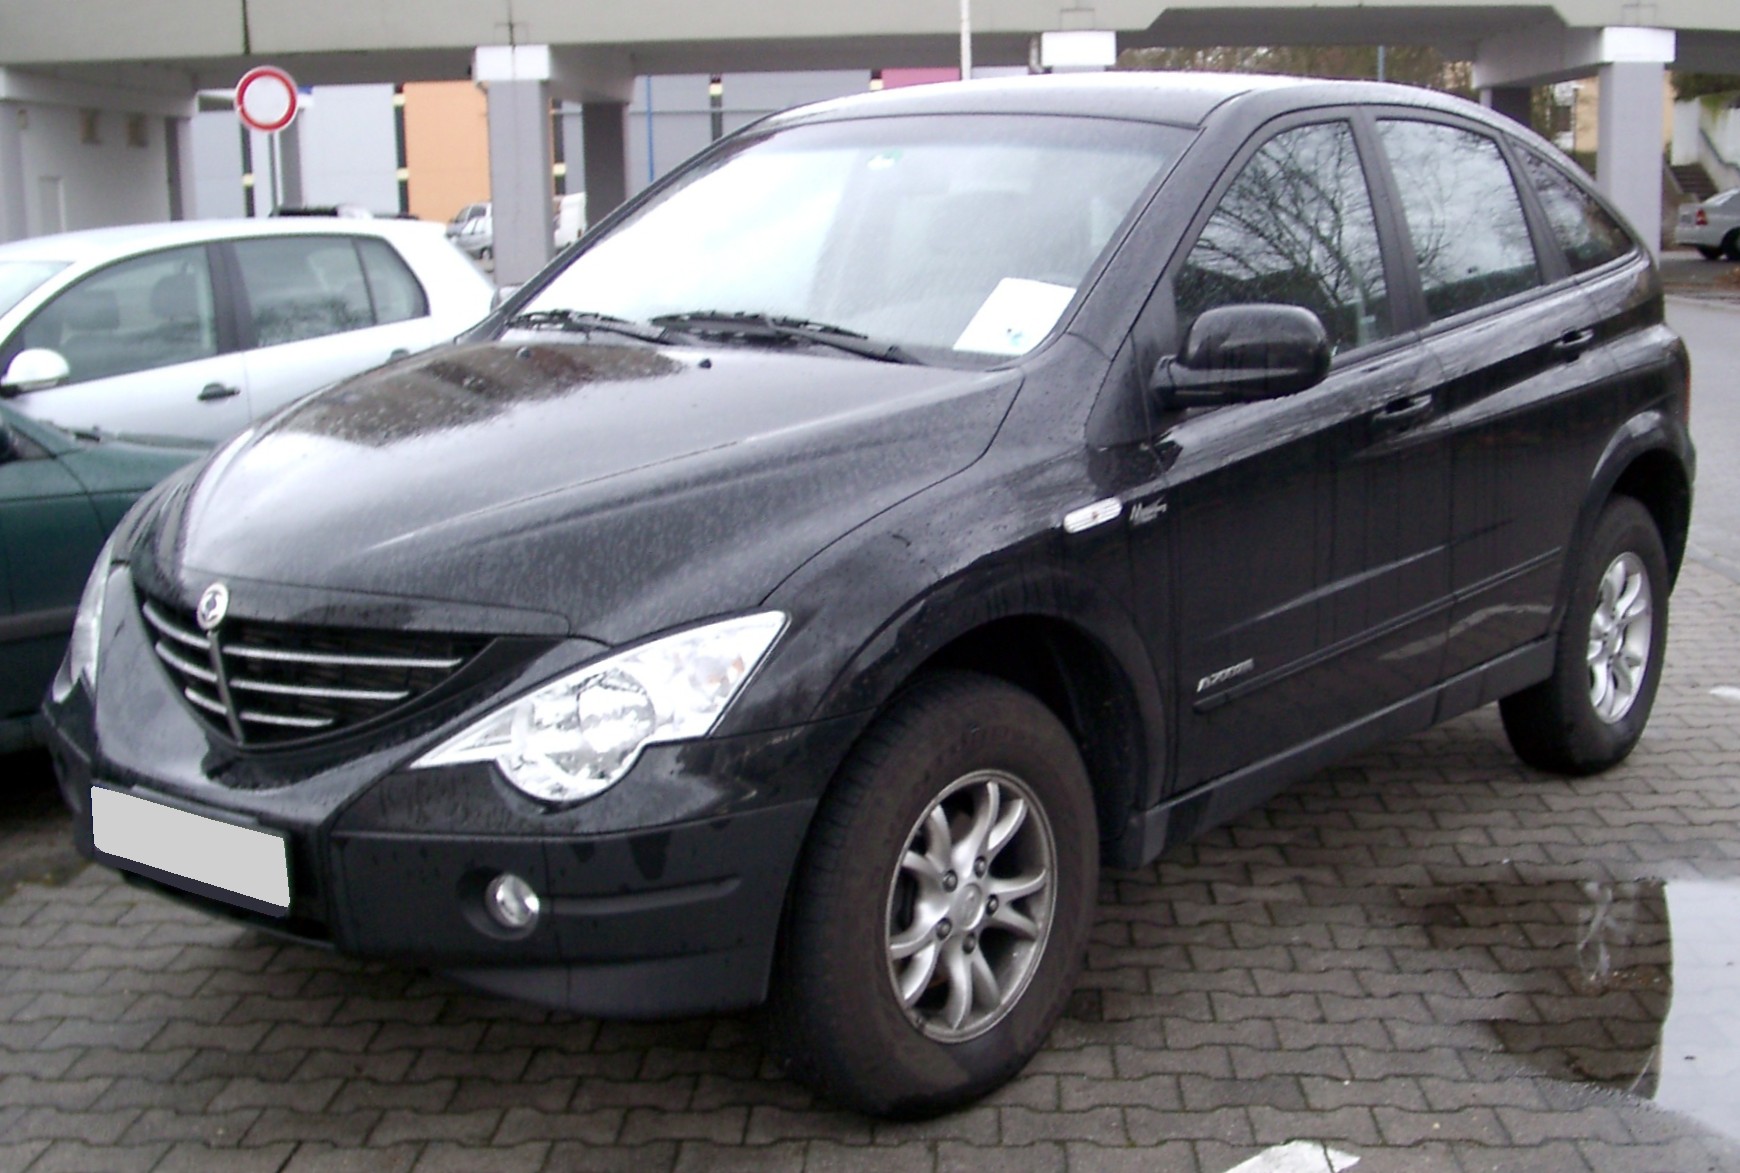 File:SsangYong Actyon front 20080303.jpg